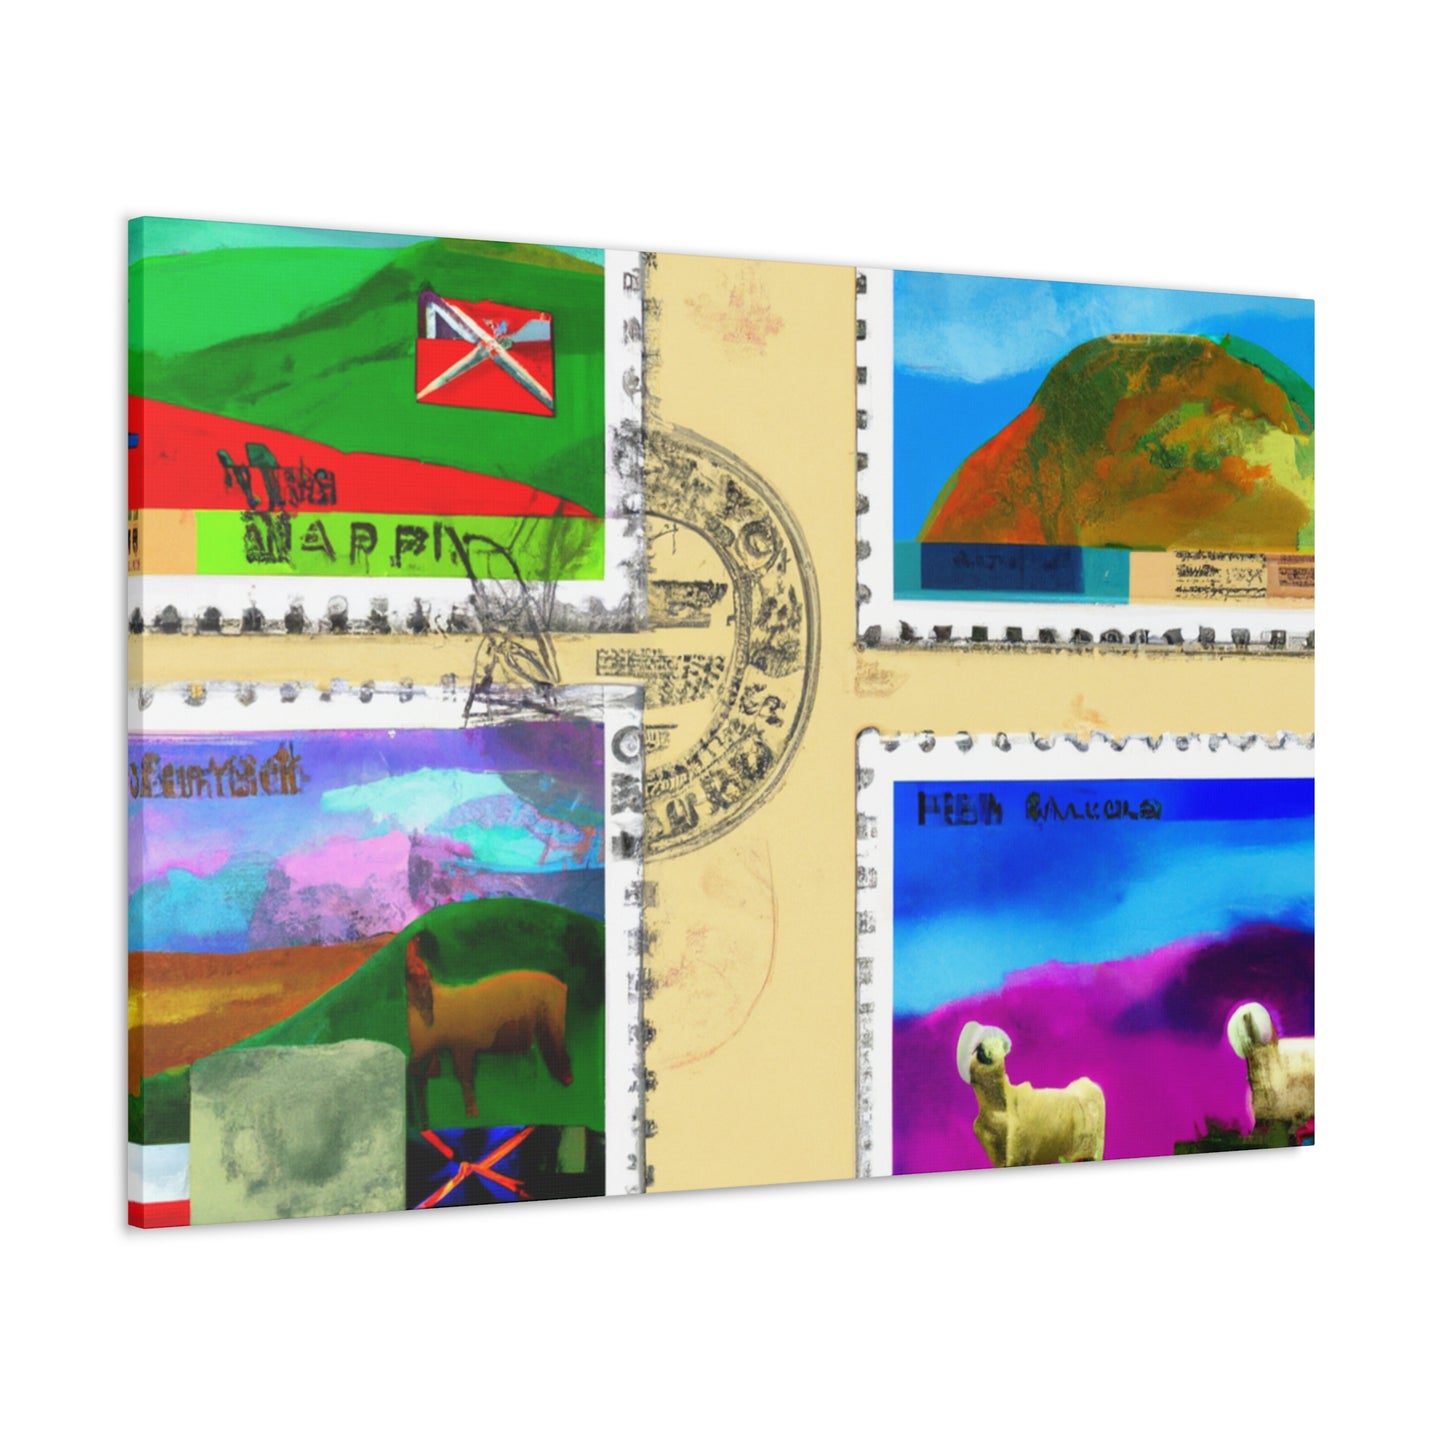 "Global Cultural Landmarks Stamps" - Postage Stamp Collector Canvas Wall Art